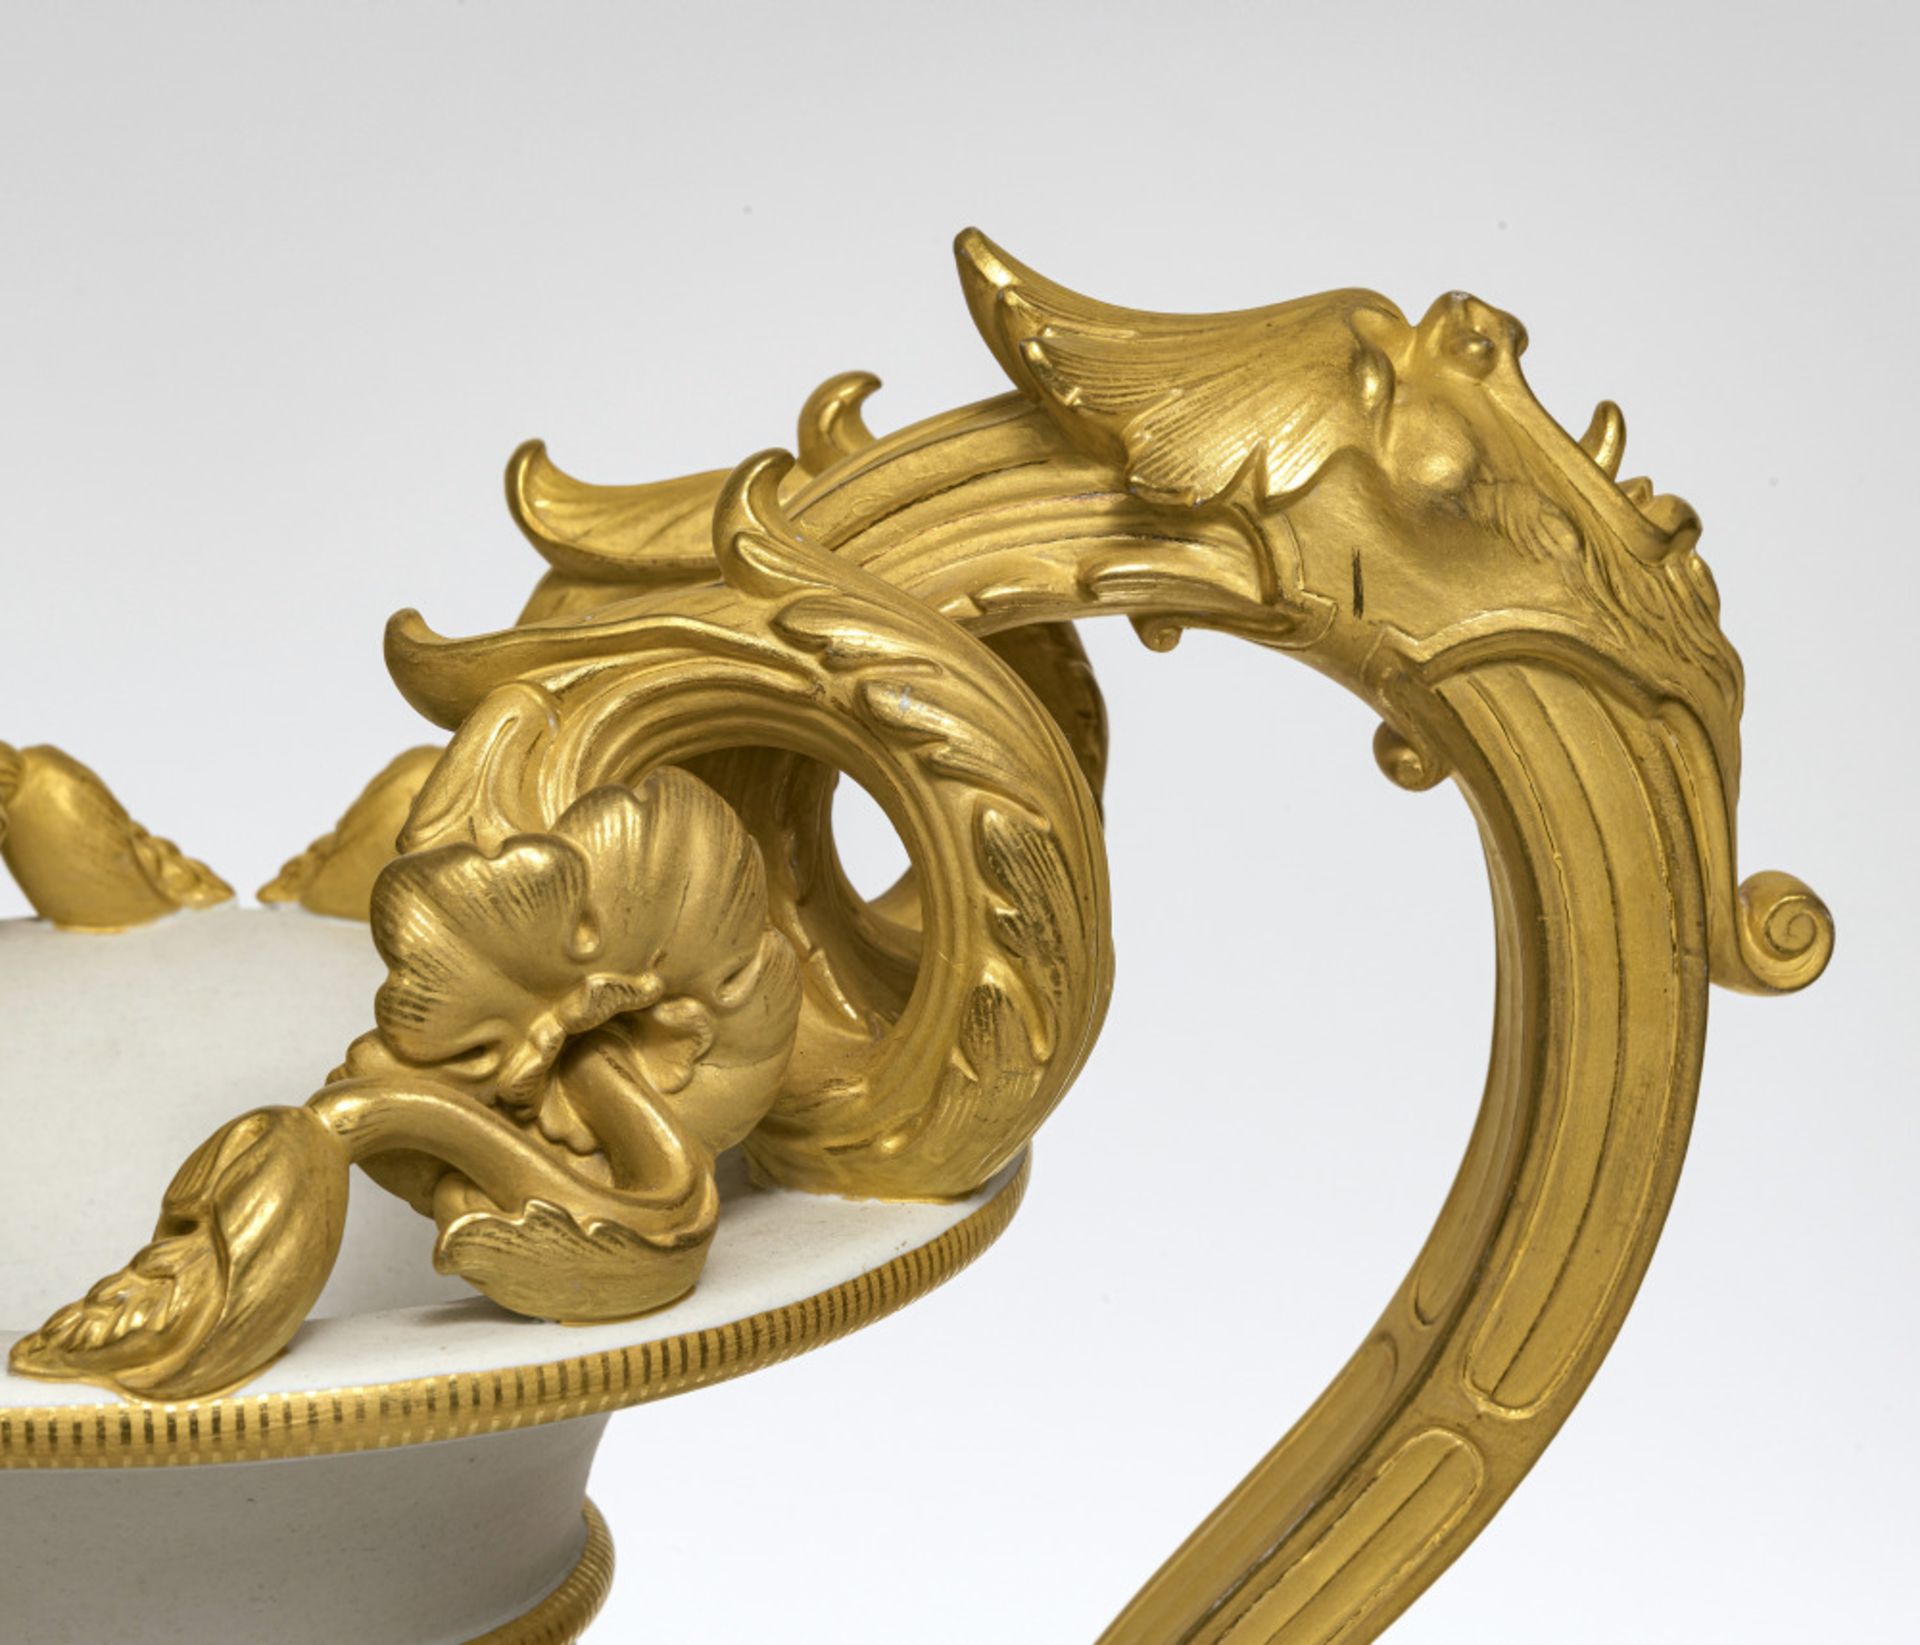 A magnificent vase with the allegory of architecture - KPM Berlin, circa 1860, model by Julius W. Ma - Image 3 of 4